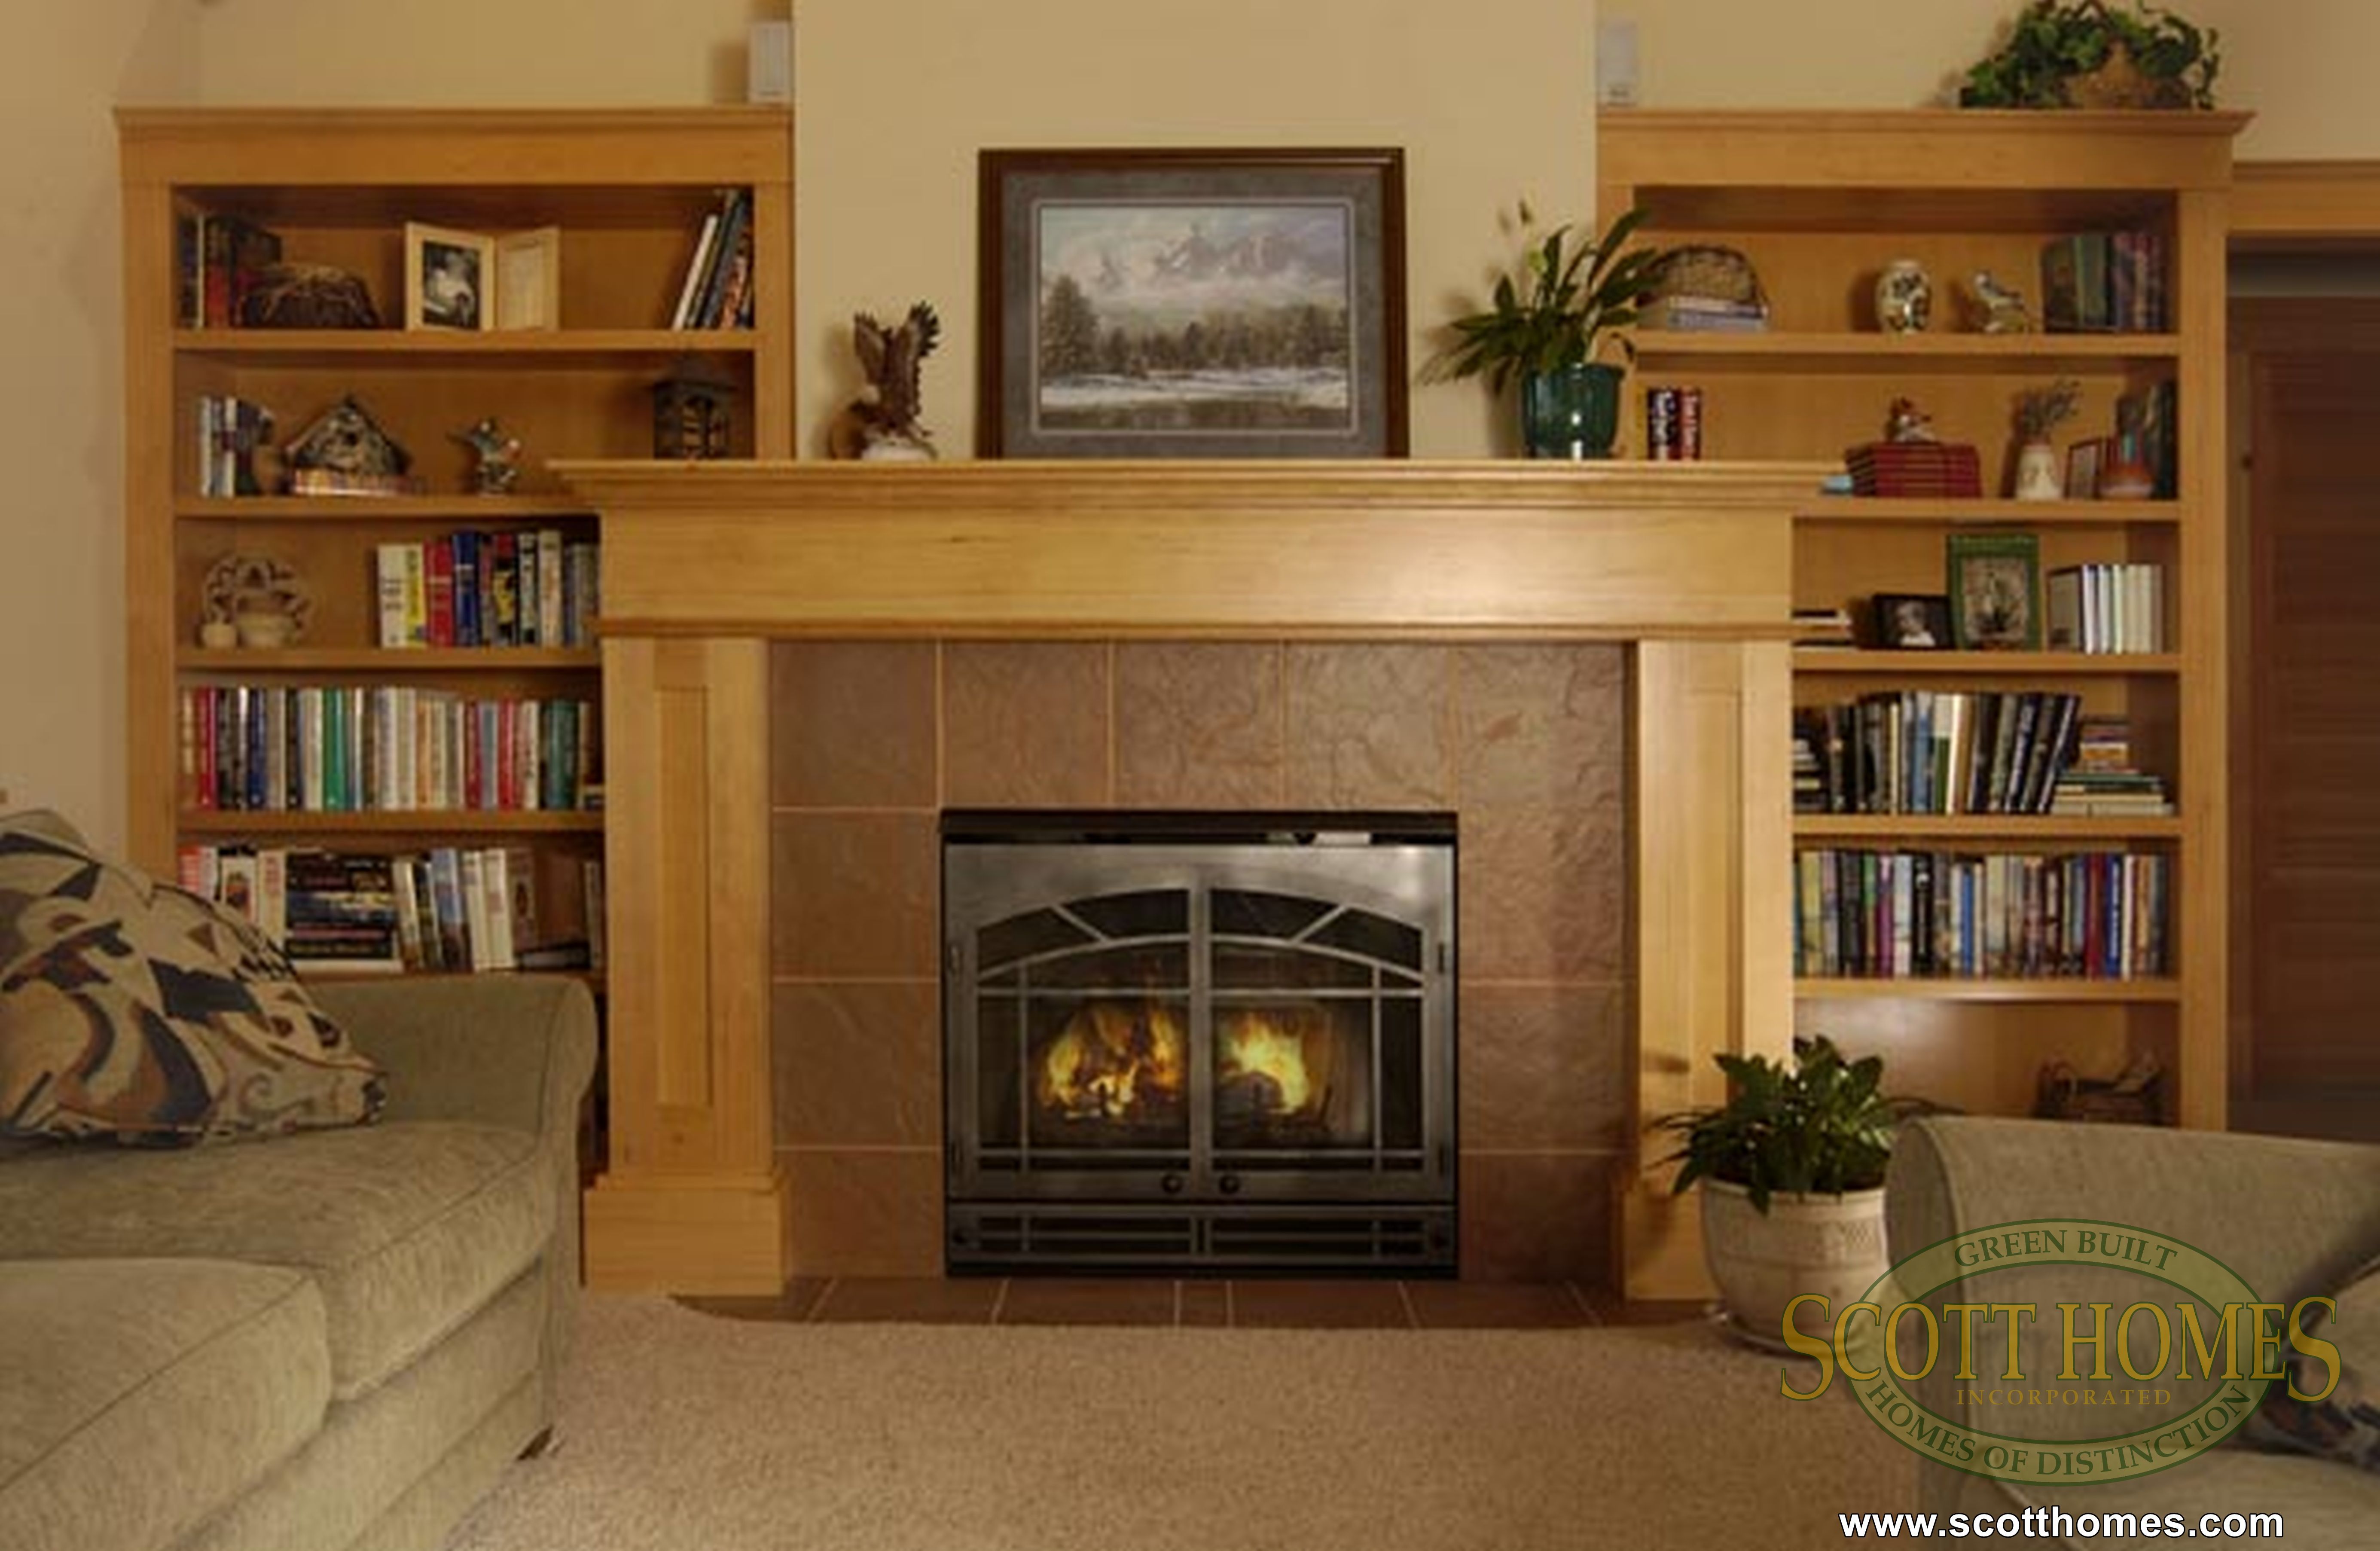 Olympia Fireplace Inspirational the Arched Doorways are Signature for Us It S Always the